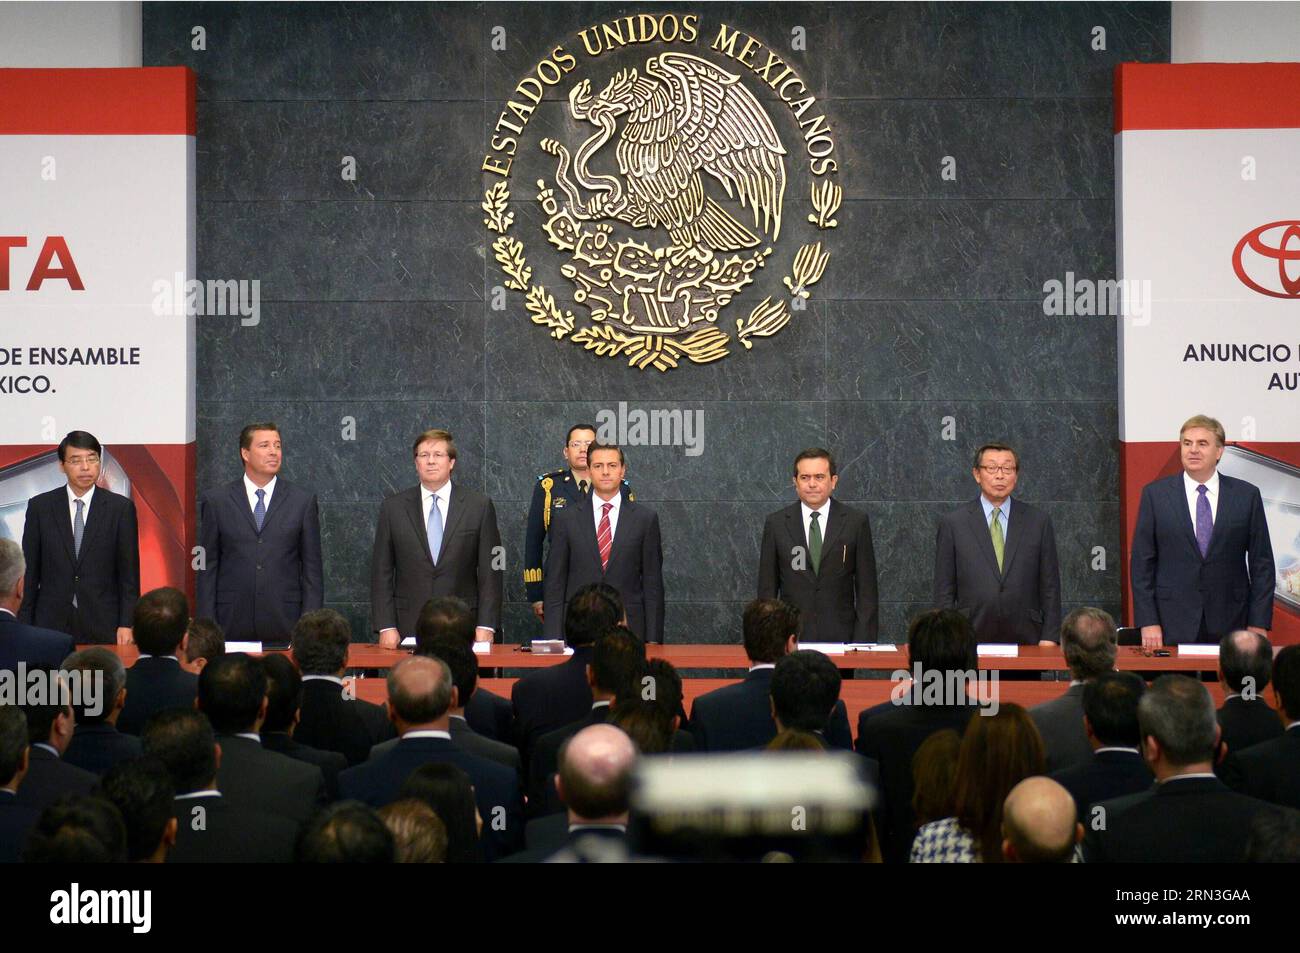 (150415) -- MEXICO CITY, April 15, 2015 -- Image provided by shows Mexican President Enrique Pena Nieto (C) taking part in the ceremony to announce the investment of the Toyota automotive assembly plant, in Mexico City, capital of Mexico, on April 15, 2015. ) (fnc) MEXICO-MEXICO CITY-INVESTMENT-PENA NIETO MEXICO SxPRESIDENCY PUBLICATIONxNOTxINxCHN   Mexico City April 15 2015 Image provided by Shows MEXICAN President Enrique Pena Nieto C Taking Part in The Ceremony to Announce The Investment of The Toyota Automotive Assembly plant in Mexico City Capital of Mexico ON April 15 2015 FNC Mexico Mex Stock Photo